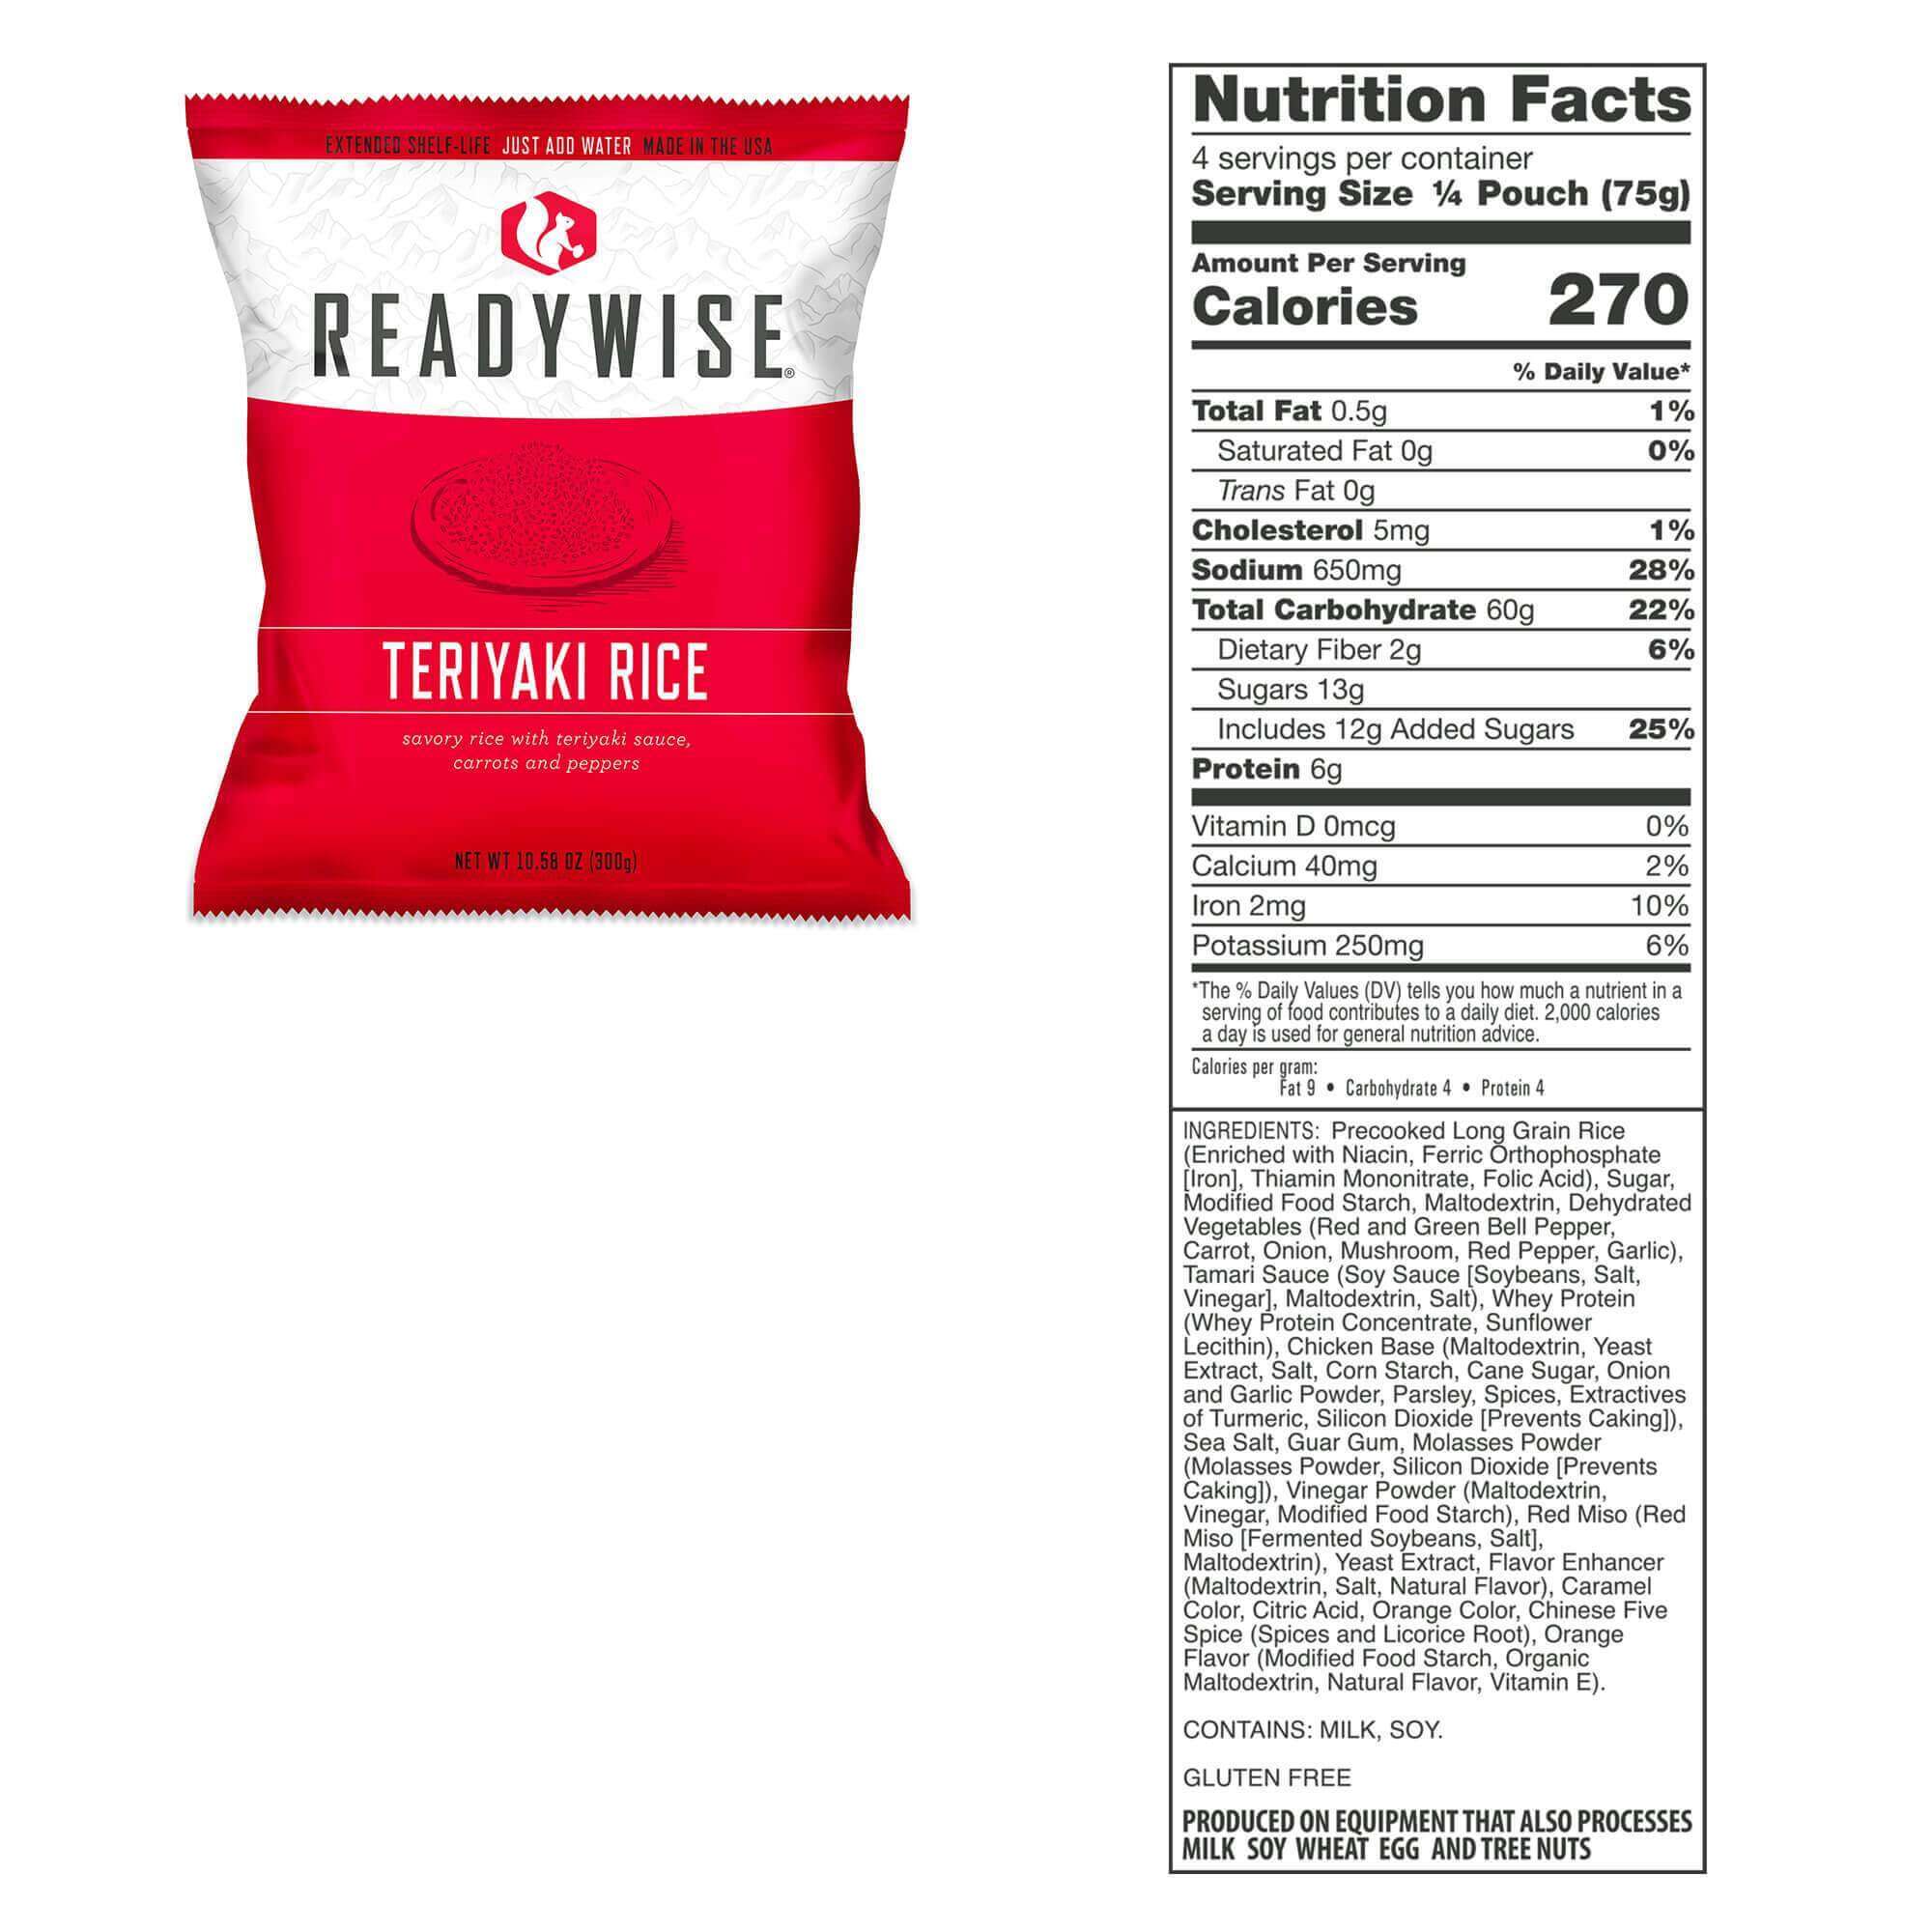 ReadyWise (formerly Wise Food Storage) 720 Serving Package - 120 lbs - Includes 3 - 120 Serving Entree Buckets and 3 - 120 Serving Breakfast Buckets (SHIPS IN 1-2 WEEKS) readywise readywise readywise readywise readywise readywise readywise readywise readywise.